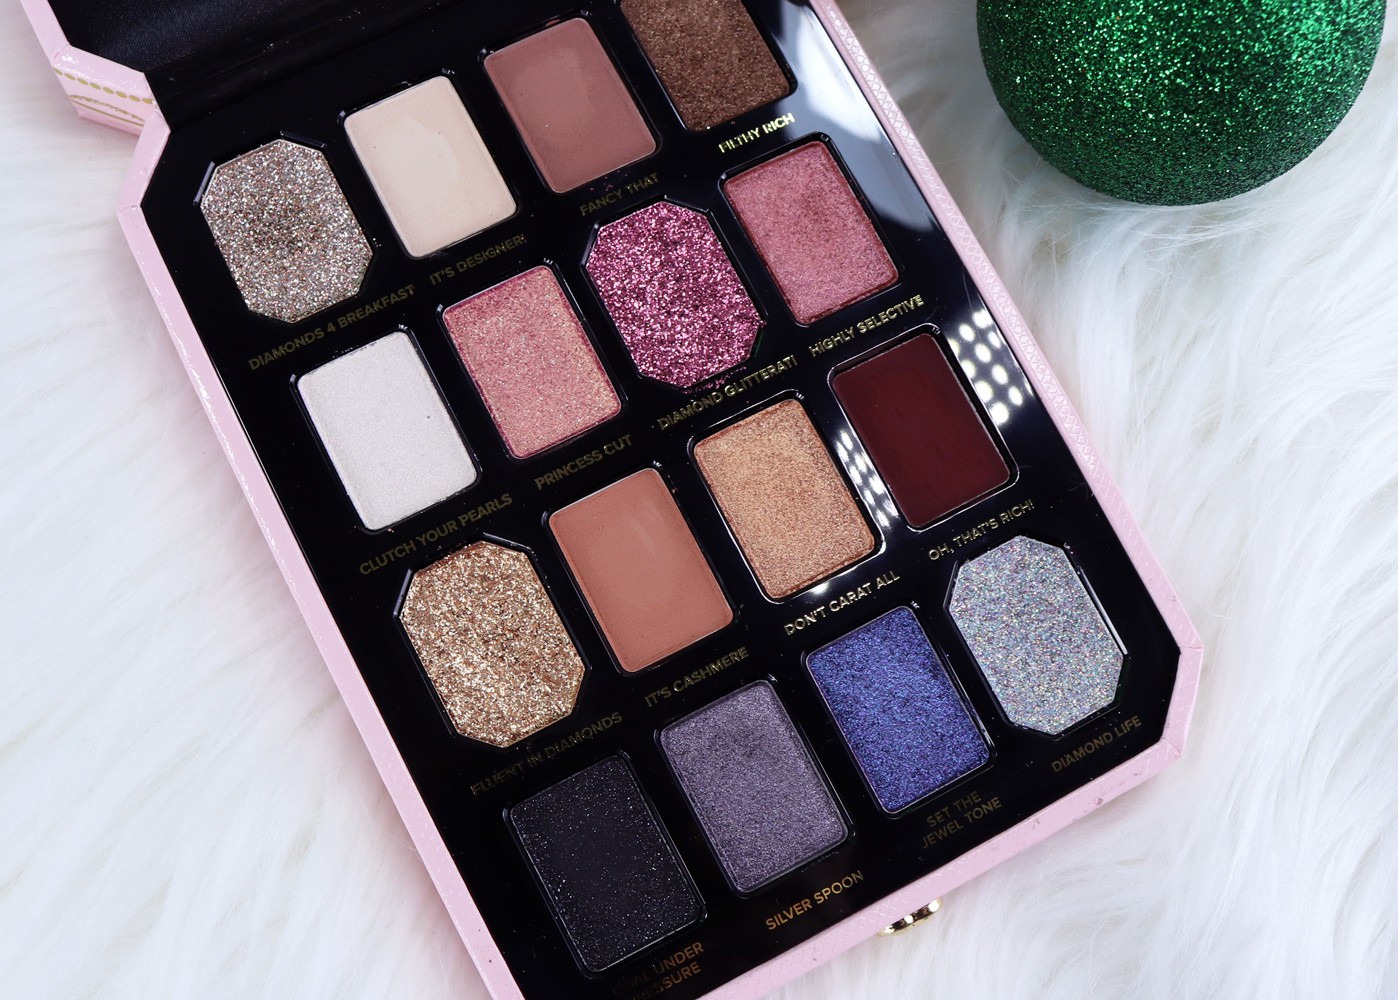 Cruelty Free Gift Guide - Too Faced Pretty Rich Palette